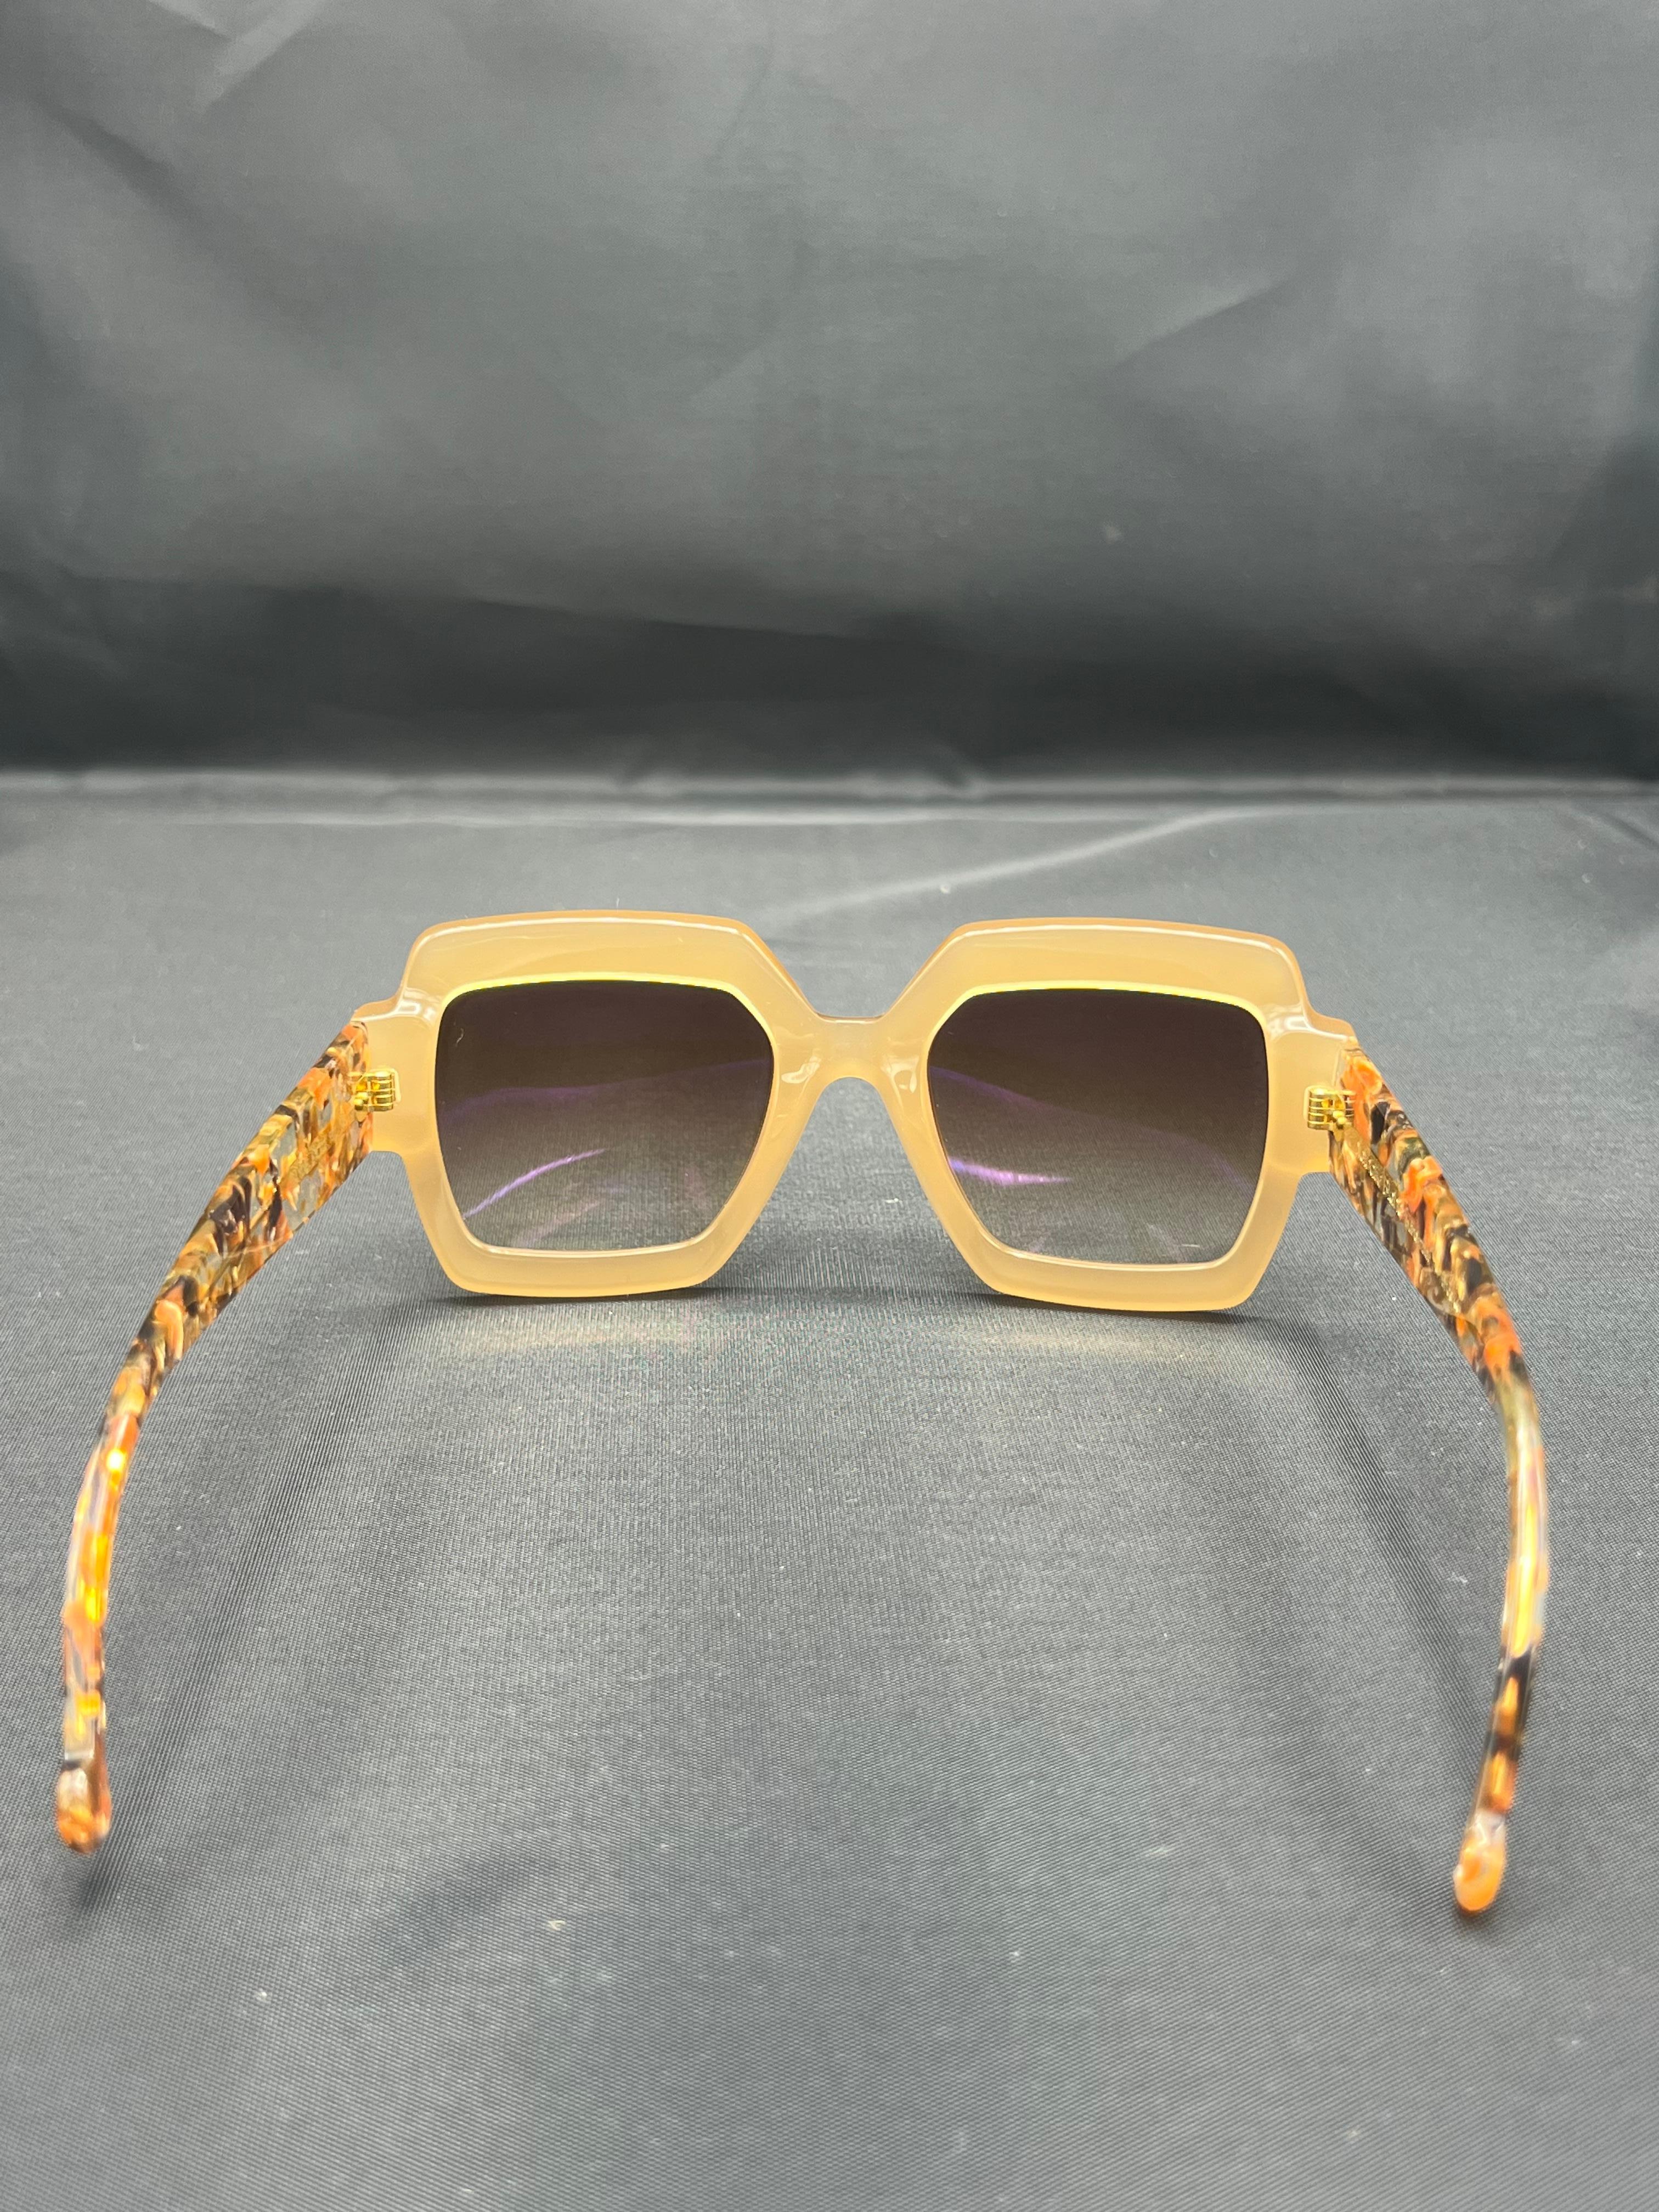 Natalie Blank Brown Square Sunglasses w/ Case In Excellent Condition For Sale In Beverly Hills, CA